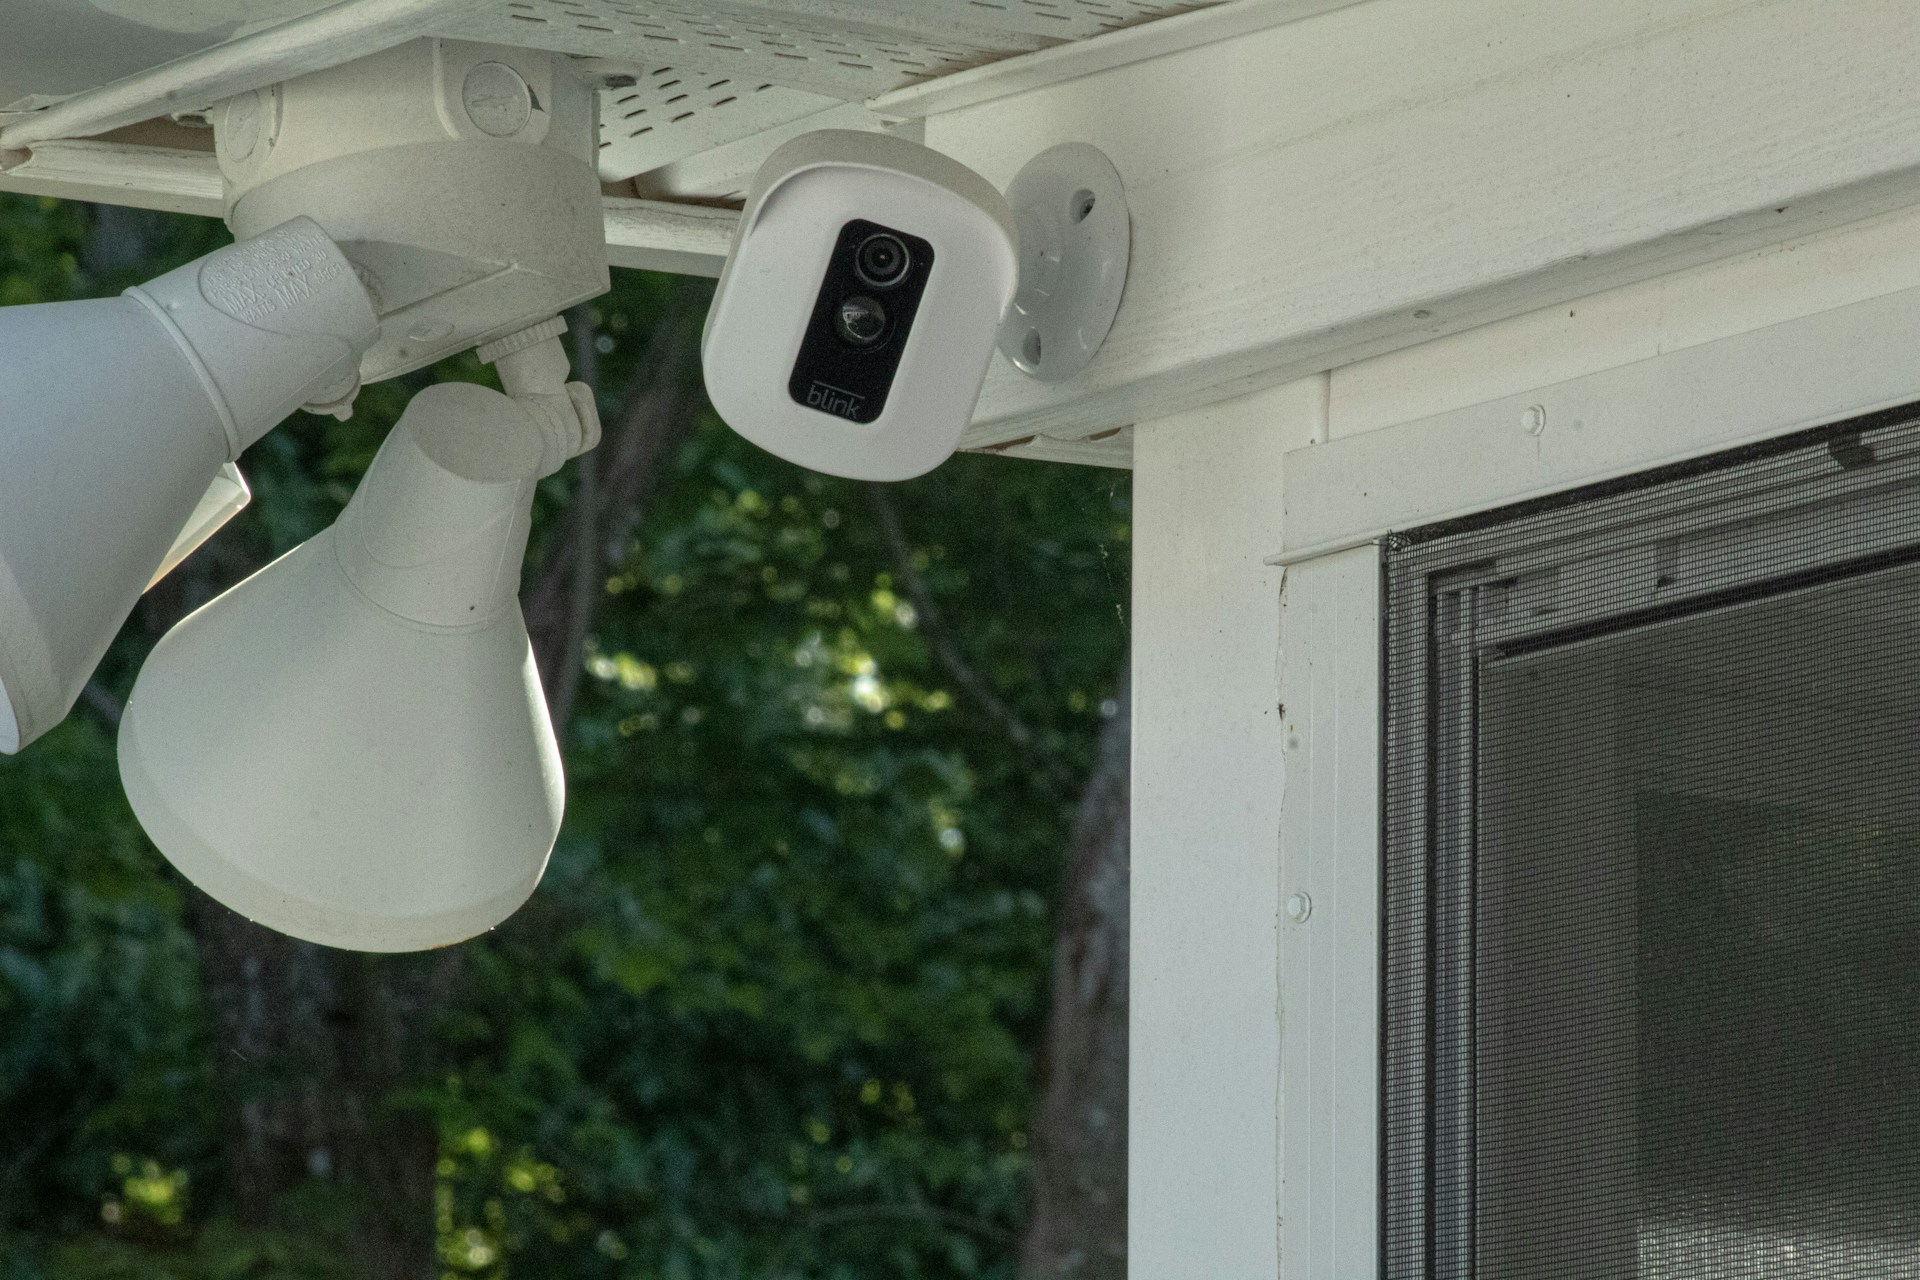 A security camera hangs on the corner of a home above a window. Behind it are two motion activated lights pointing away toward the yard.